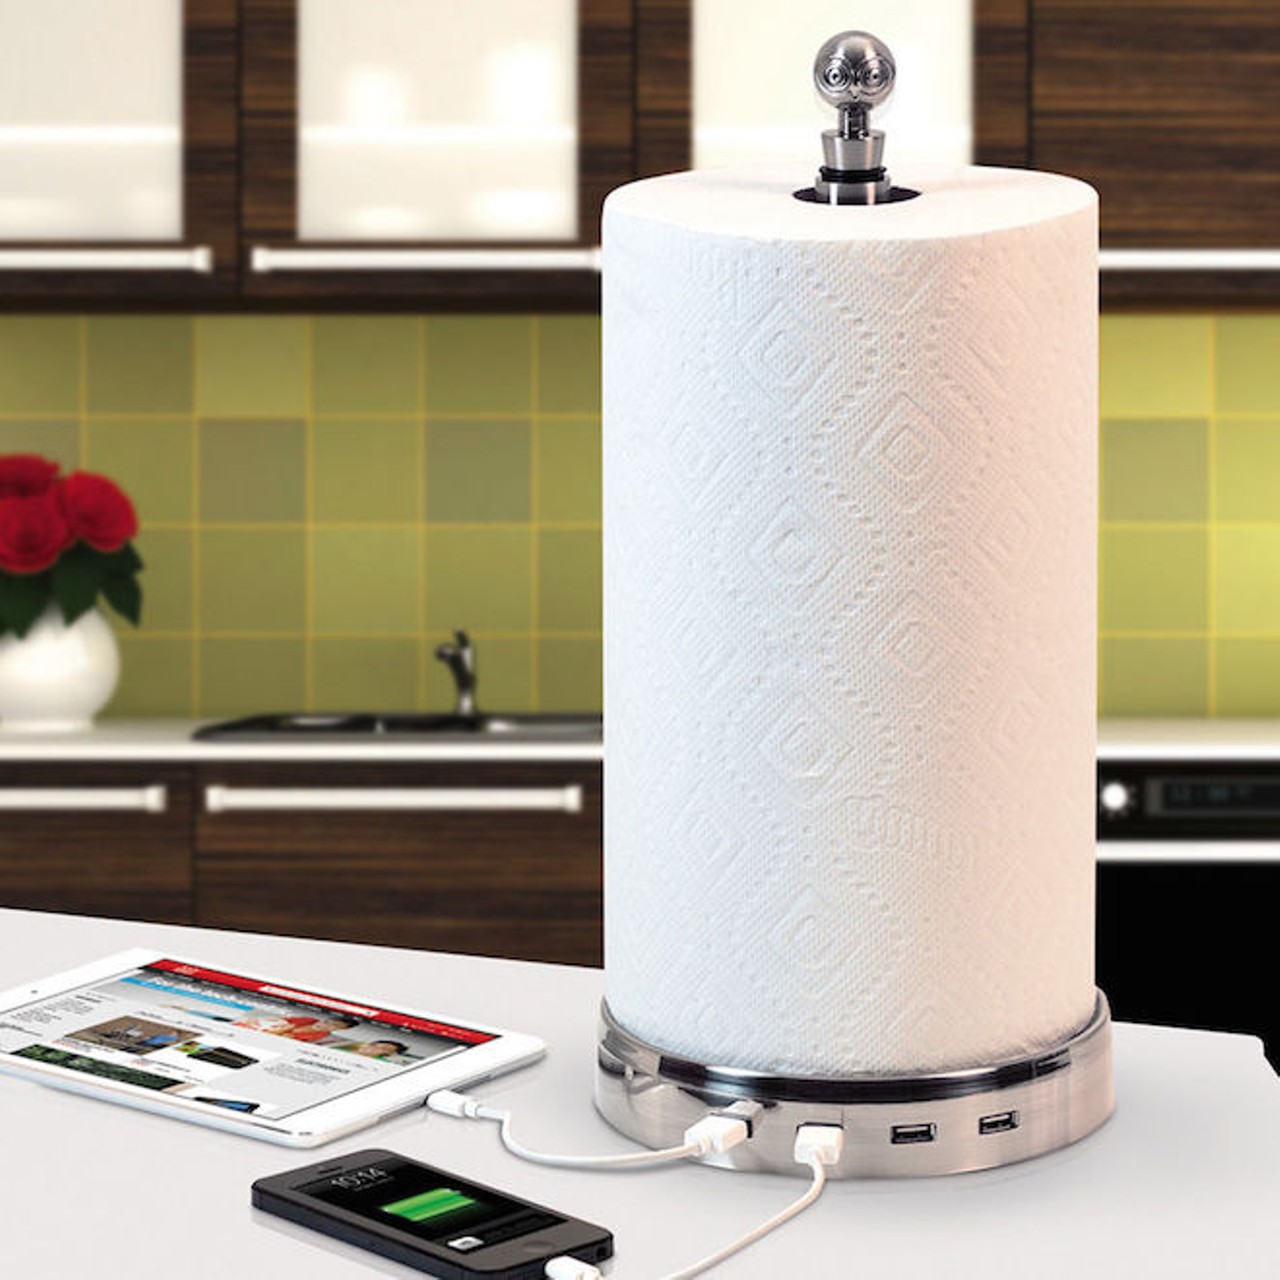 A paper towel holder with USB ports, so you can charge your iPad while drying your hands.